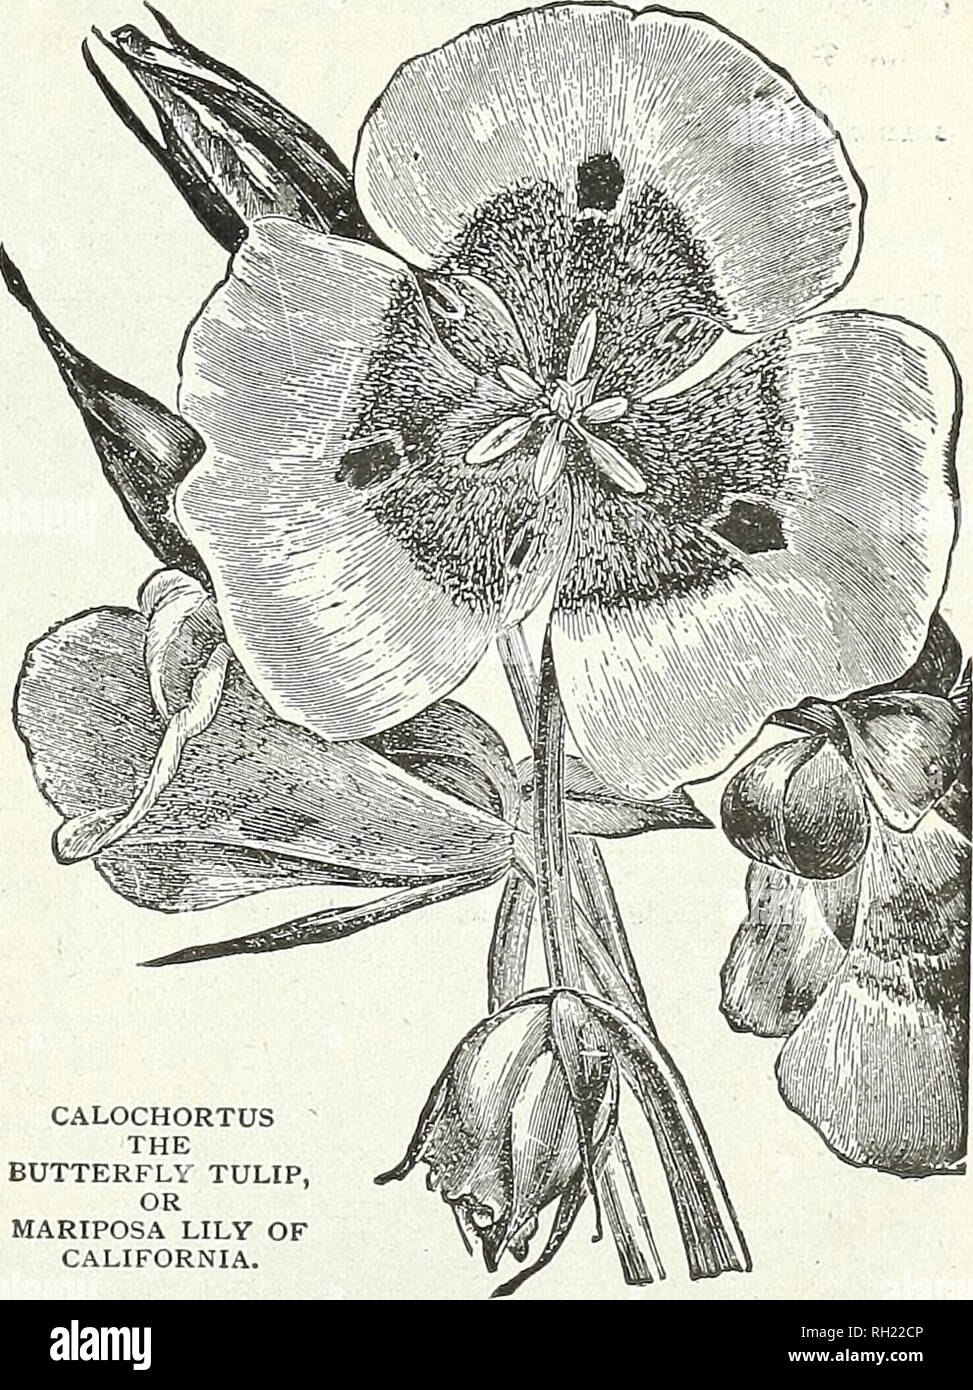 . Bulbs, plants, and seeds for autumn planting : 1896. Gardening Equipment and supplies Catalogs; Seeds Catalogs; Bulbs (Plants) Catalogs; Flowers Catalogs; Flowers Seeds Catalogs. CALOCHORTUS THE BUTTERFLY TULIP, OR MARIPOSA LILY OF CALIFORNIA. -^^^â¢^CRINUM KIRKII. CRINUM KIRKU. (Ready in November.) Very handsome bulbous plants for either pot culture, in the greenhouse or open ground plantmg in the summer months. This magnificent variety produces flowers of the greatest beauty. Usually two flower stalks of dark purplish color are sent up at the same time, each bearing a large umbel composed  Stock Photo